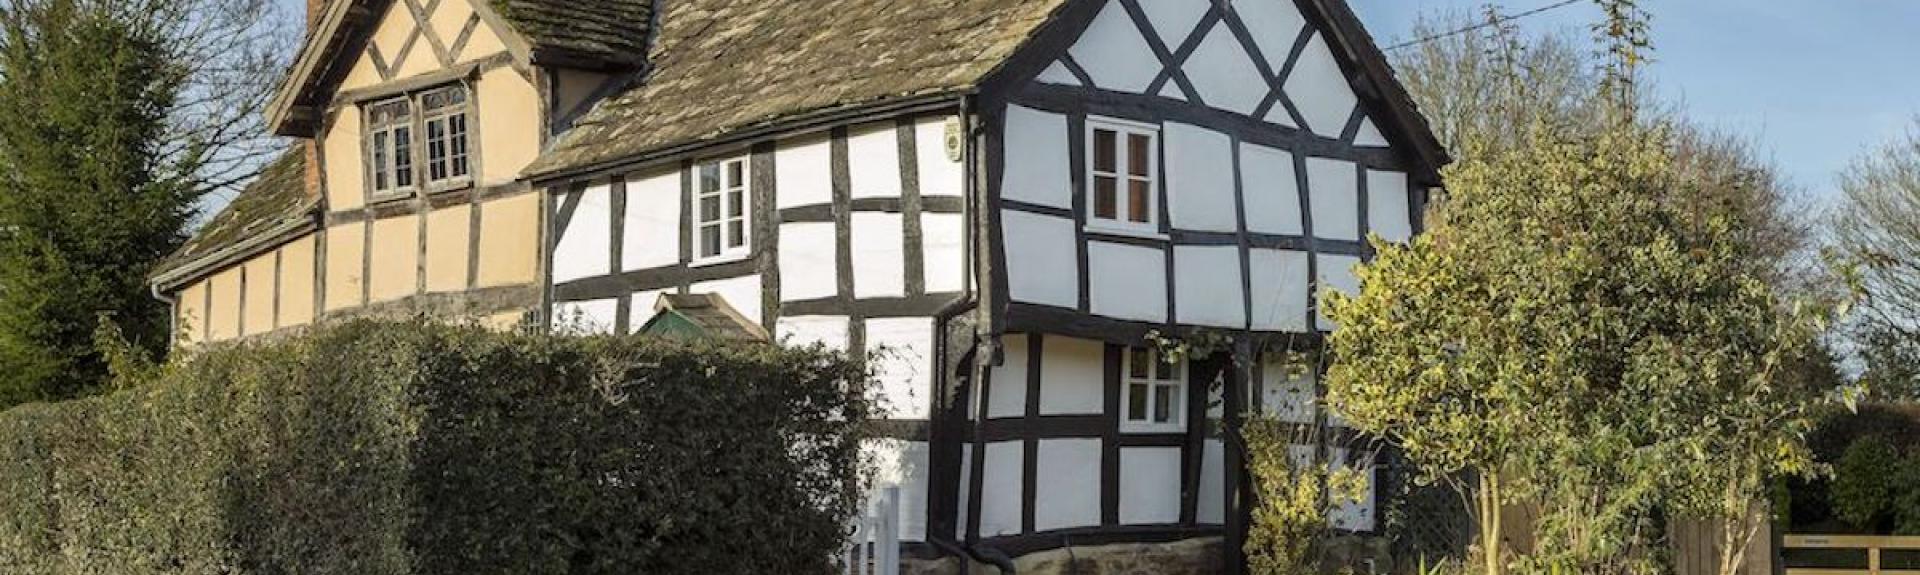 A half-timbered Tudor cottage  in Leominster overlooks a shingle parking space and shrub-filled garden.